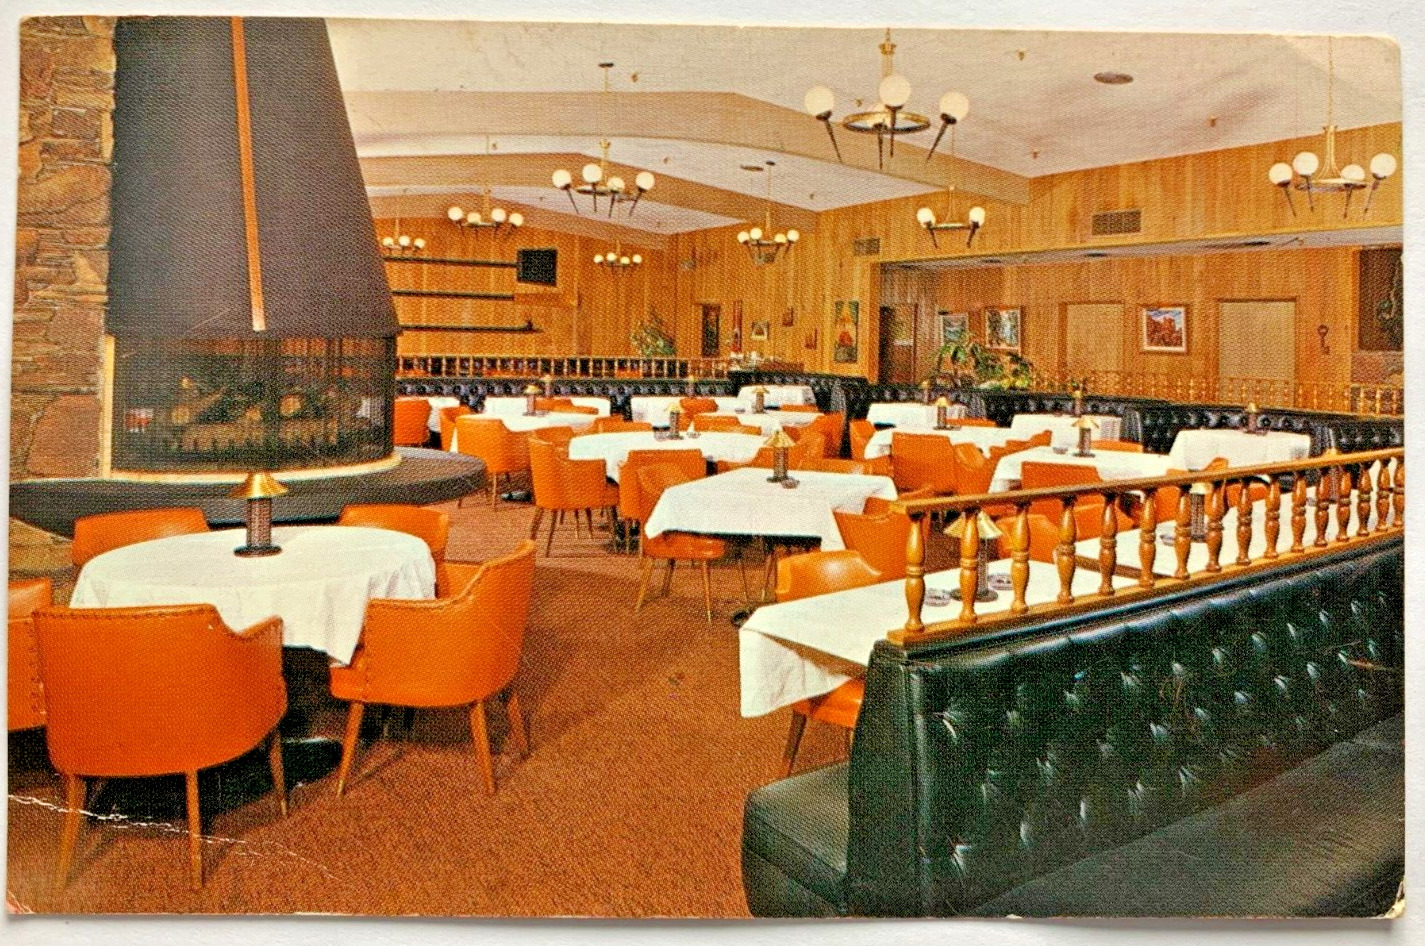 Sands Hotel San Diego California Postcard 1968 Posted Dining Room Fireplace Wood